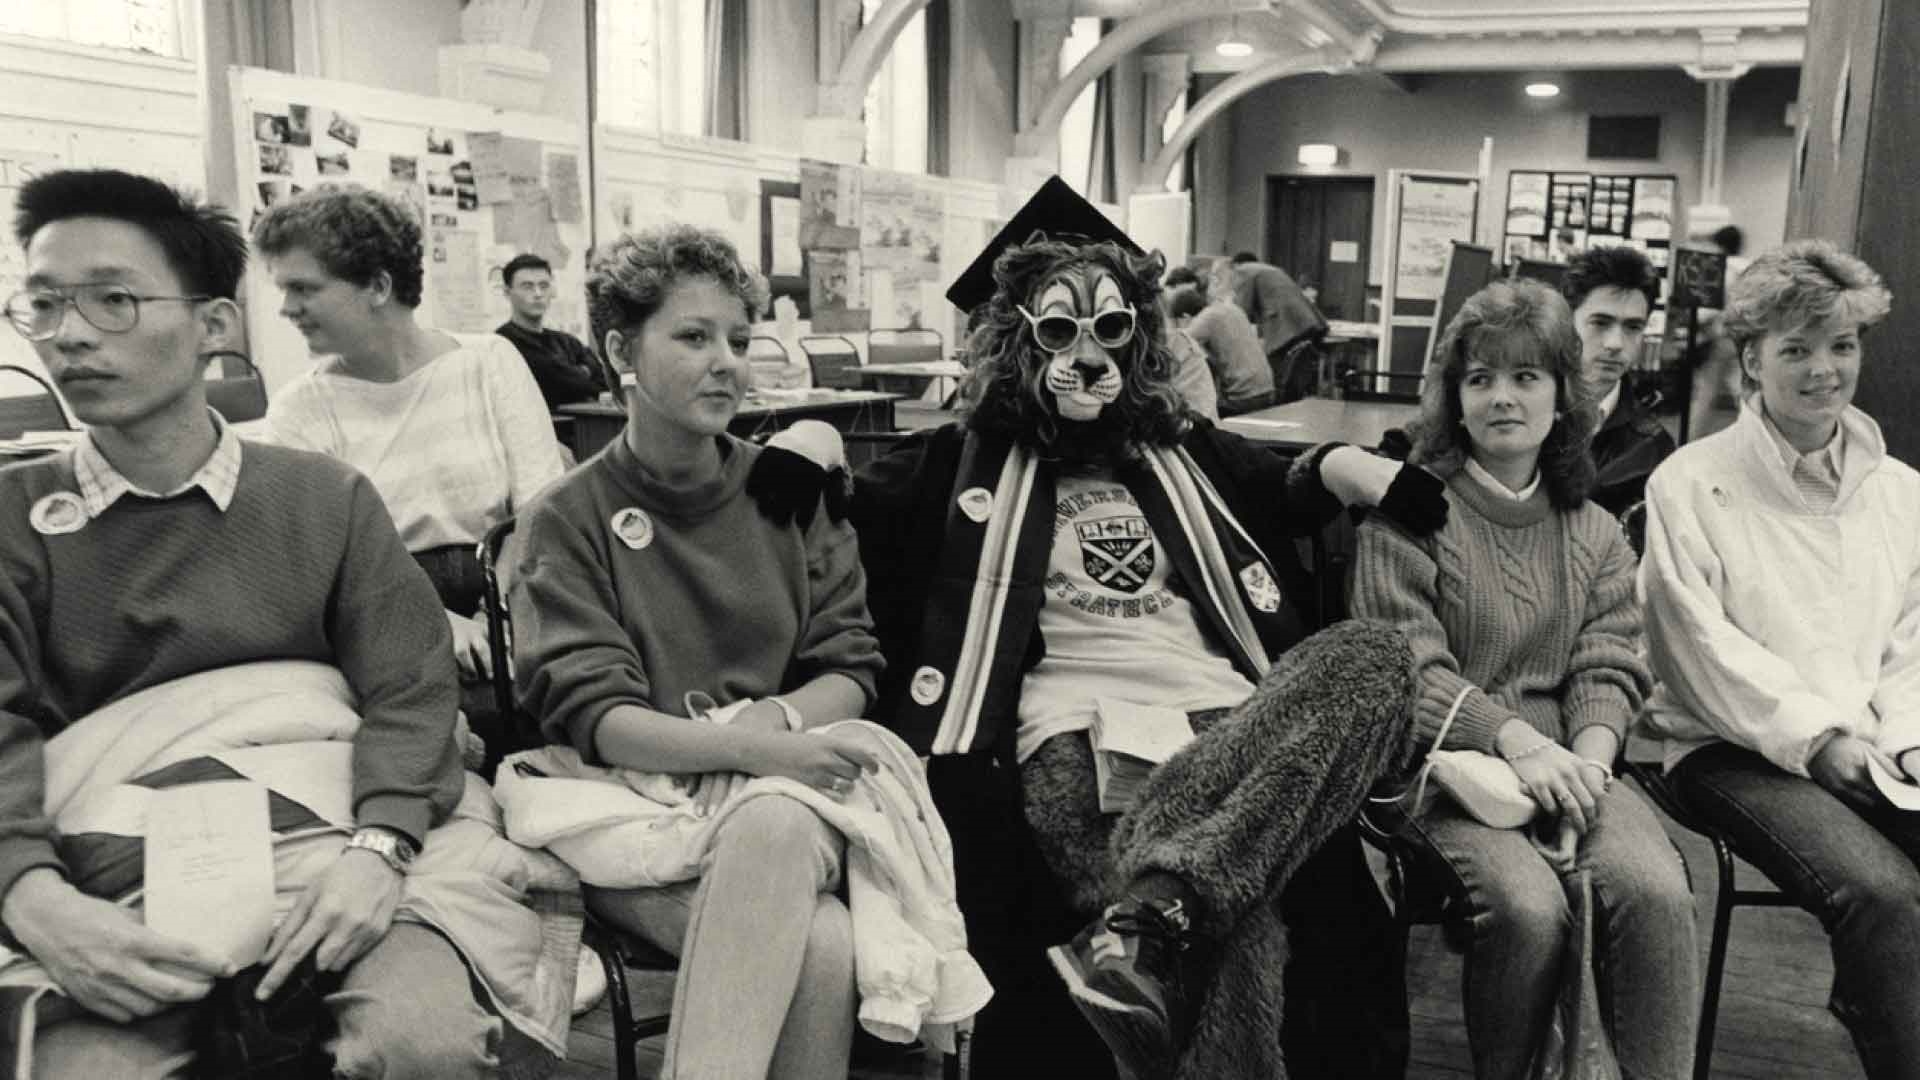 Strathclyde students in 1986, with Alumni mascot Anderson the Lion.